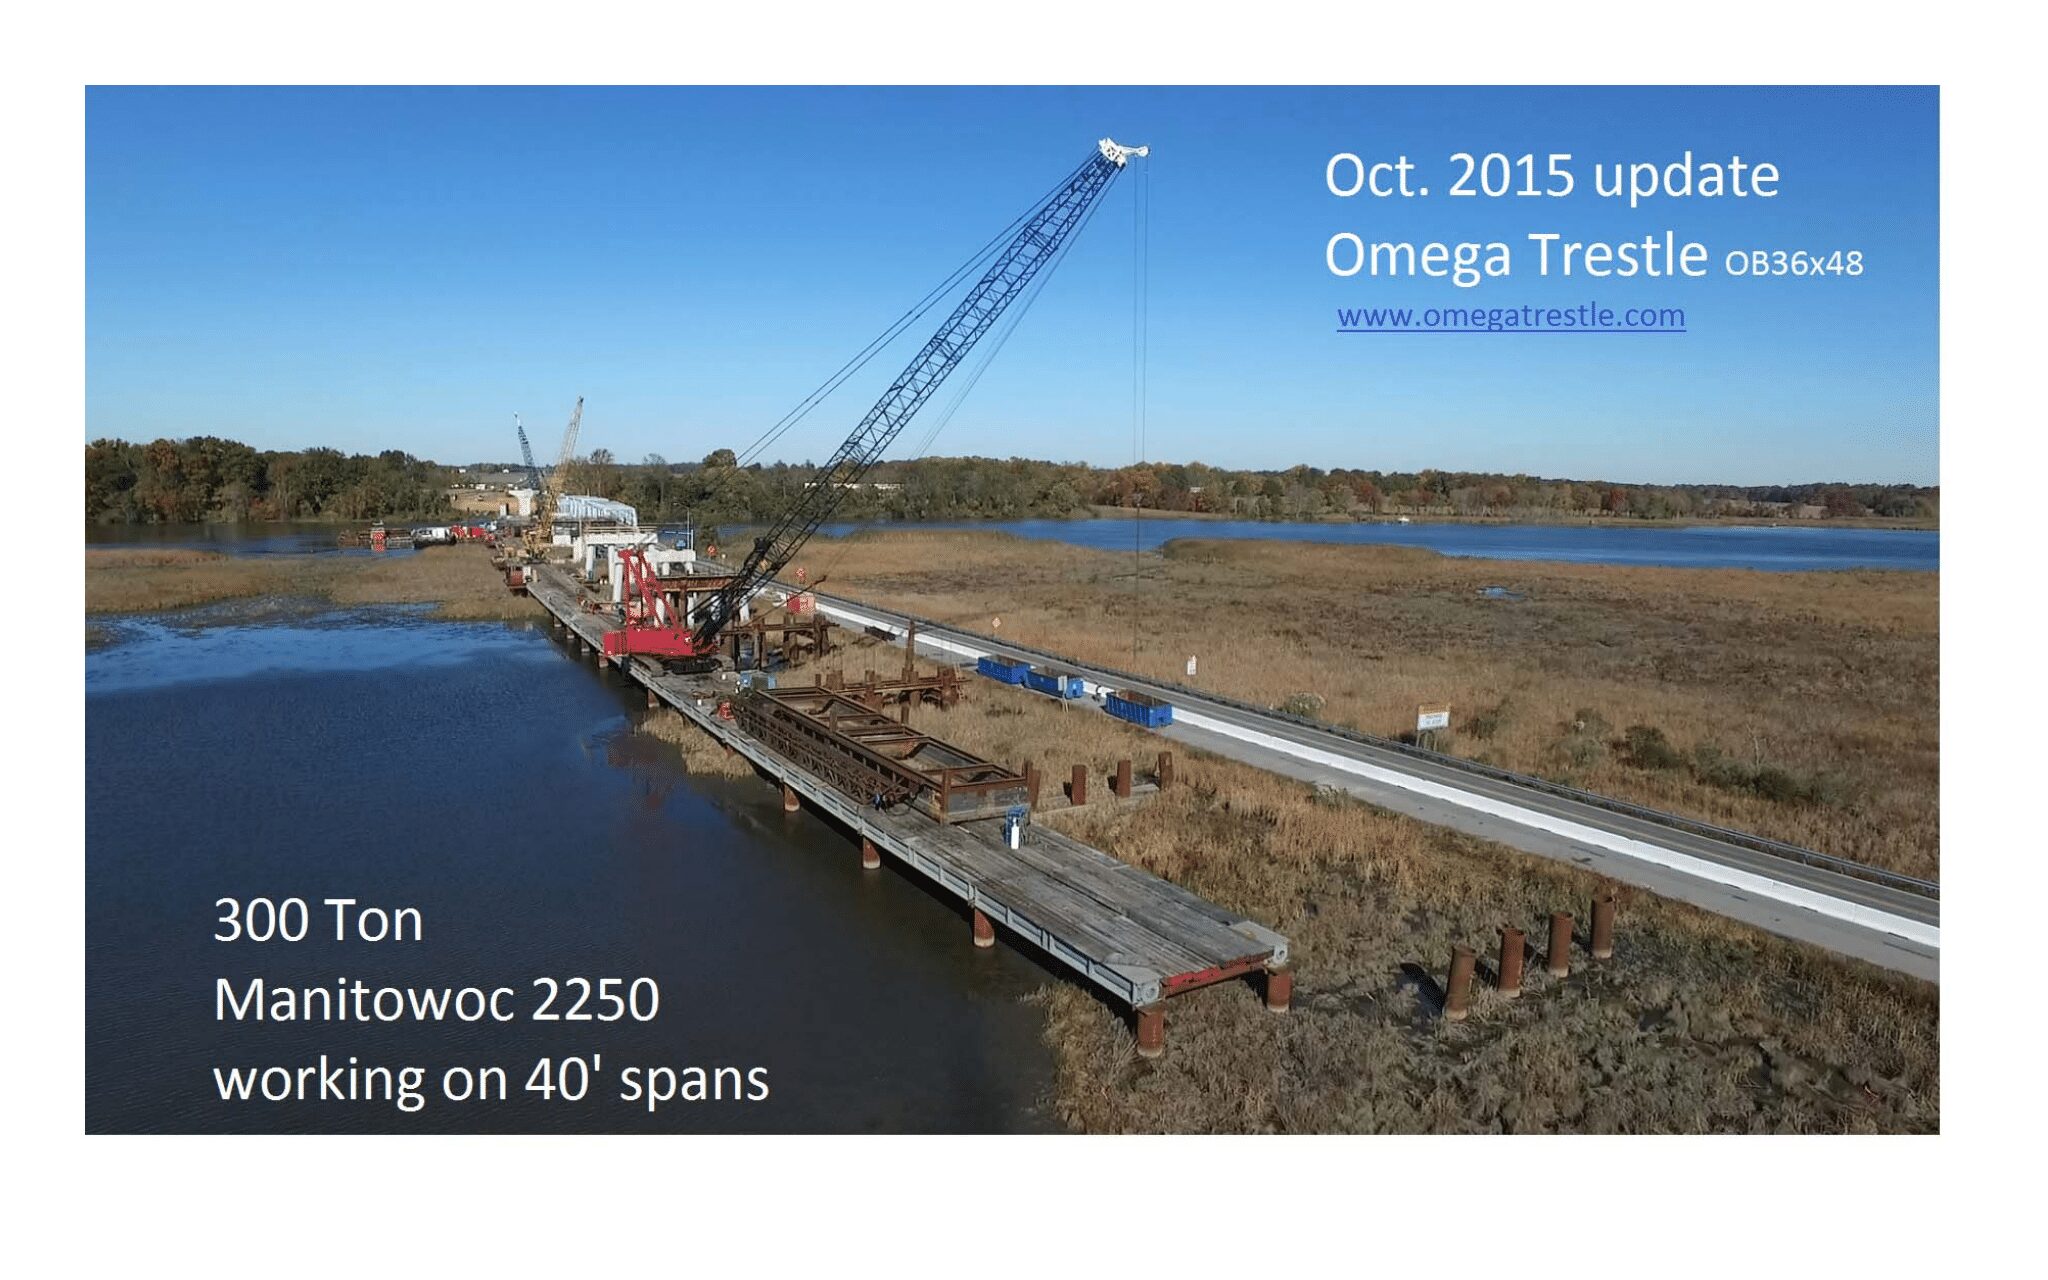 Omega Trestle project with cranes